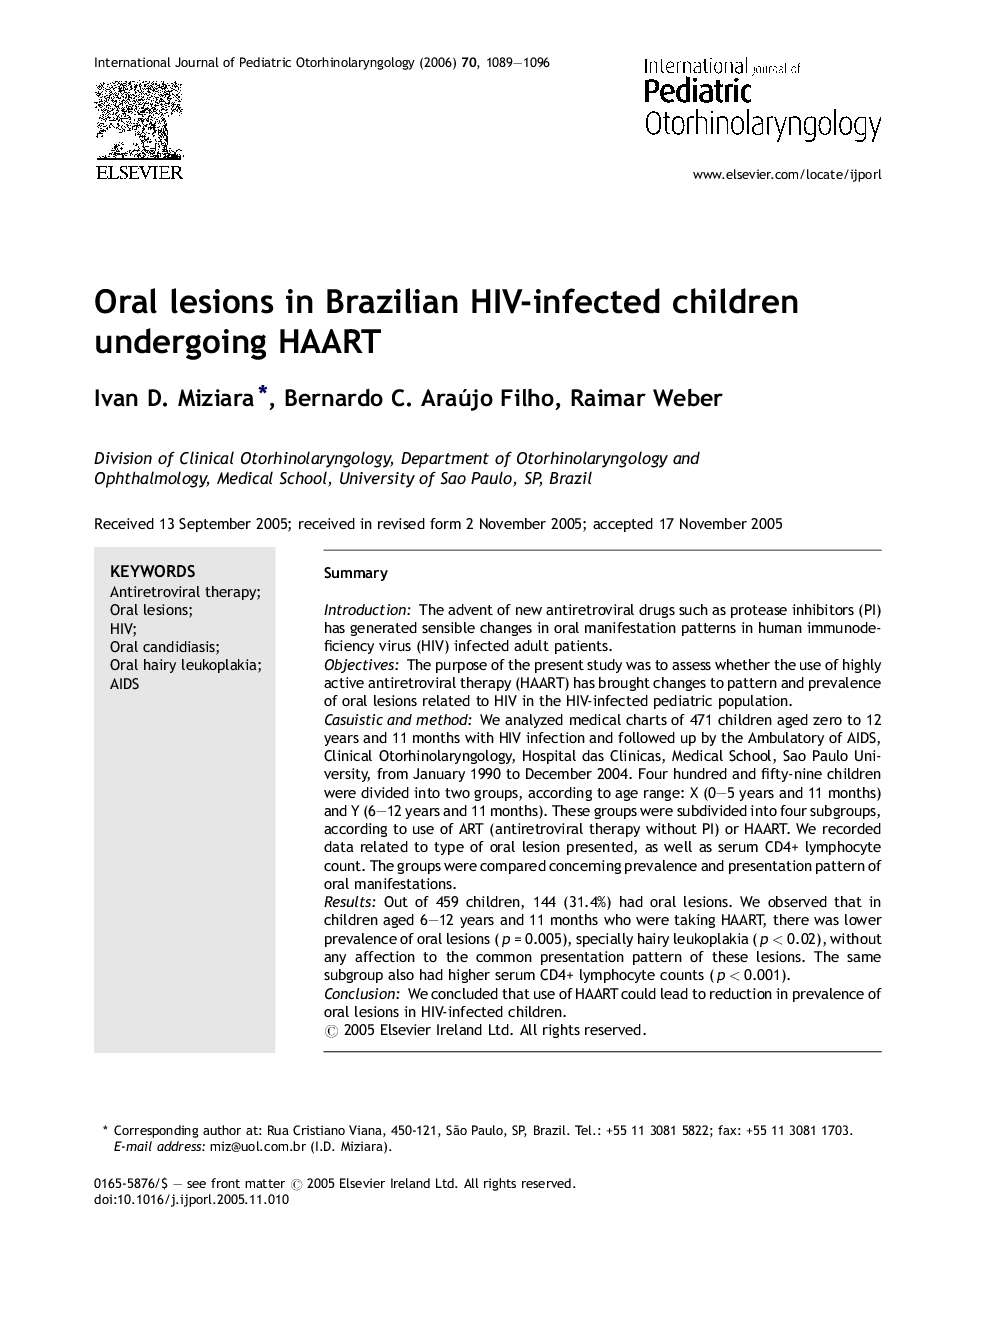 Oral lesions in Brazilian HIV-infected children undergoing HAART